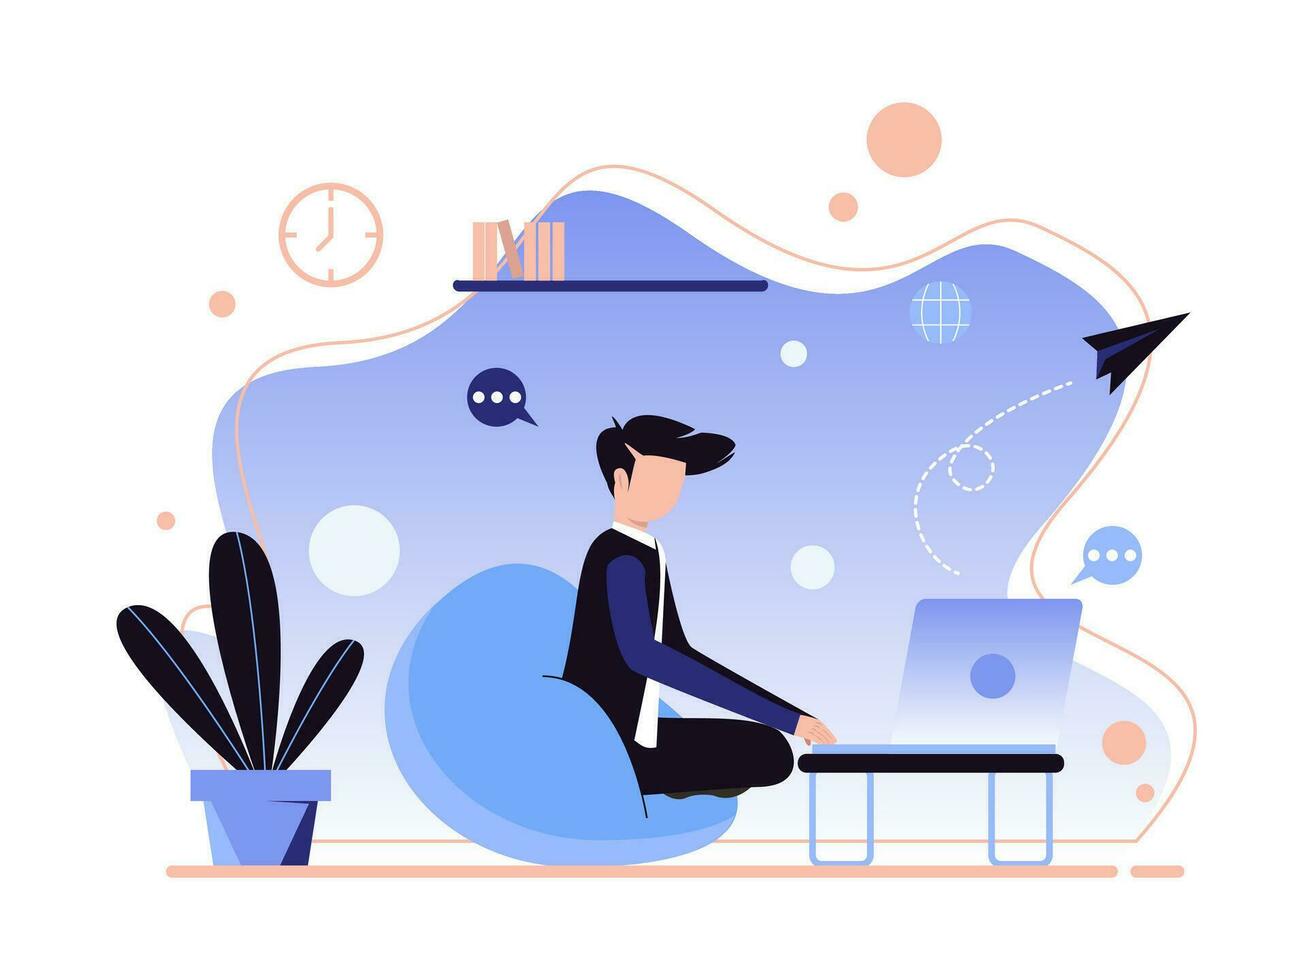 Work at home, illustrate the concept. Young people, casual workers who work with laptops and computers at home. Vector illustration of flat style